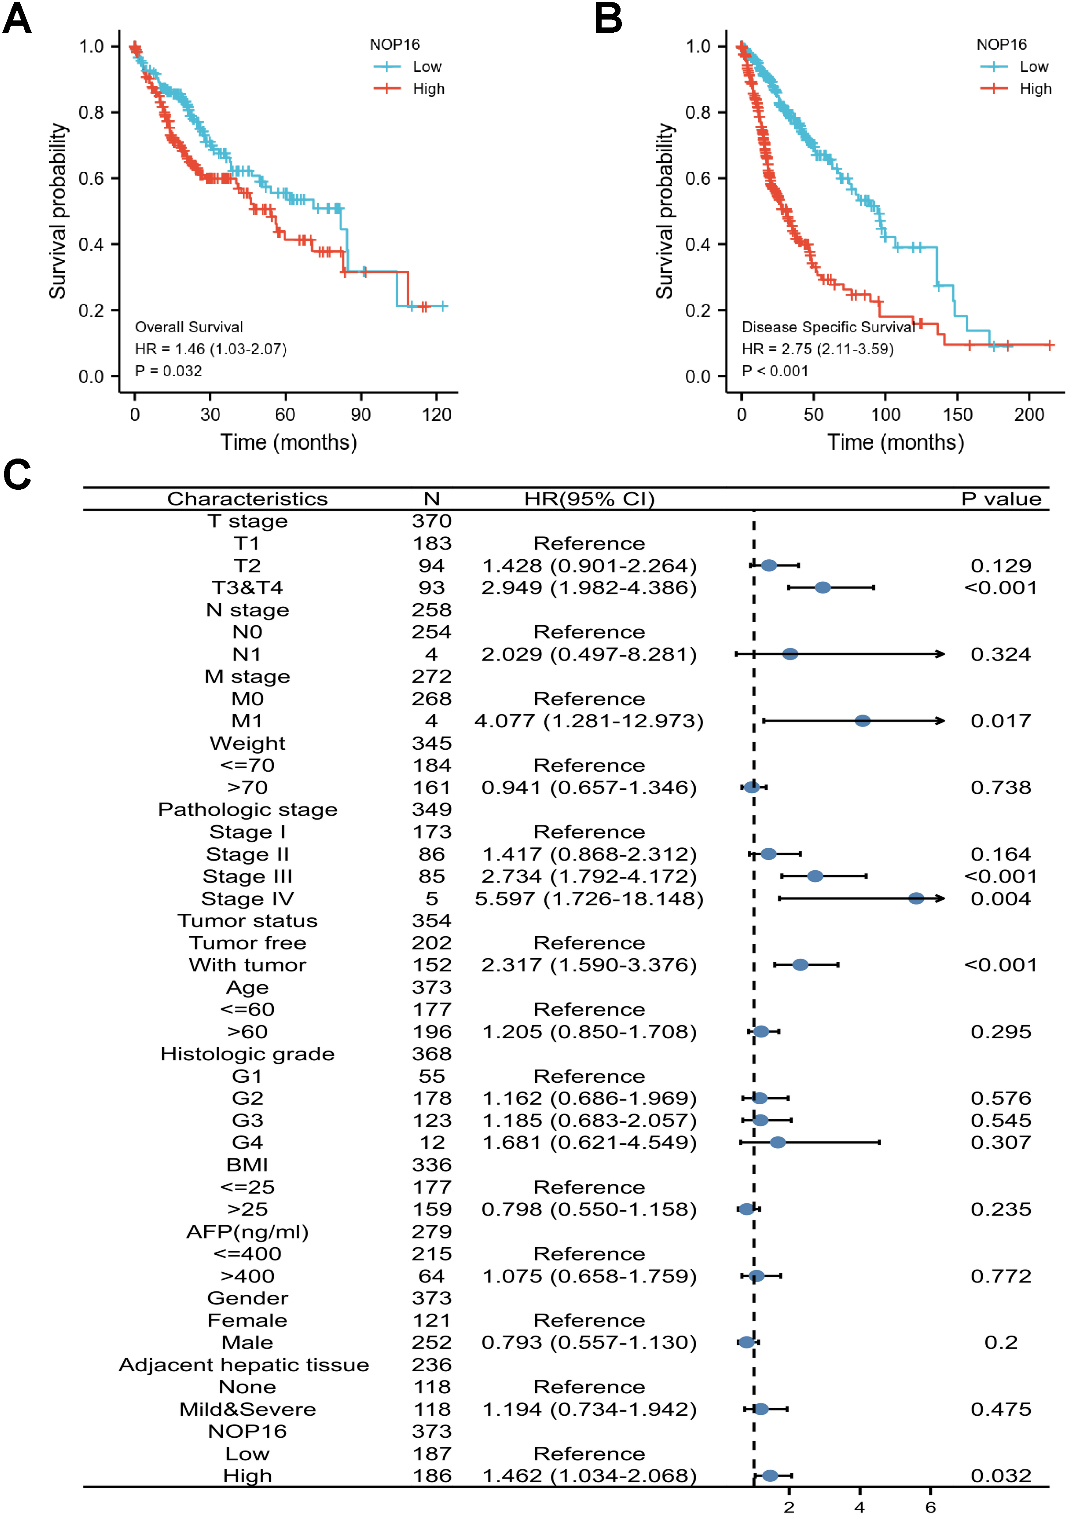 Prognostic values of NOP16 expression in patients with LIHC evaluated using the Kaplan-Meier method. Overall survival (A) and disease-specific survival (B) for LIHC patients with high versus low NOP16. (C) Forest map based on multivariate Cox analysis for overall survival. HR, hazard ratio; CI, confidence interval.